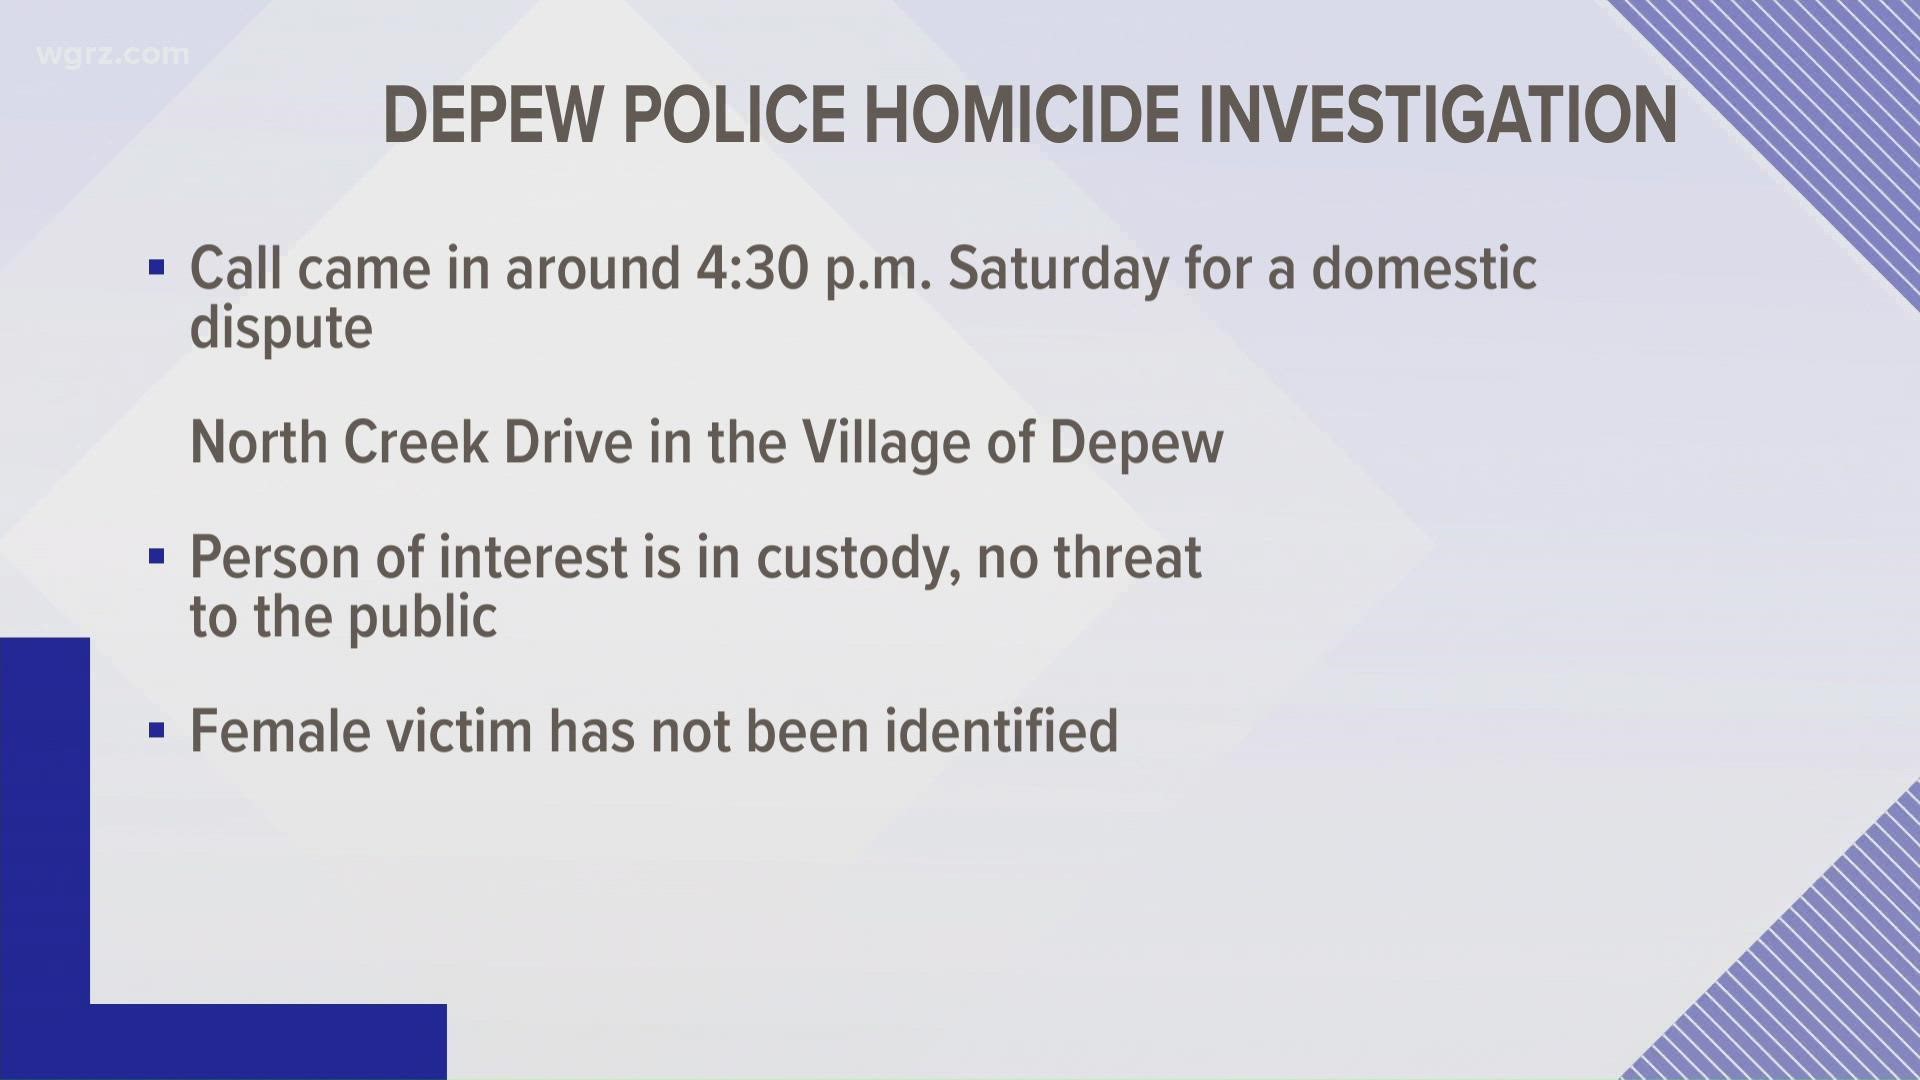 A woman was found dead Saturday afternoon on North Creek Drive in the village.